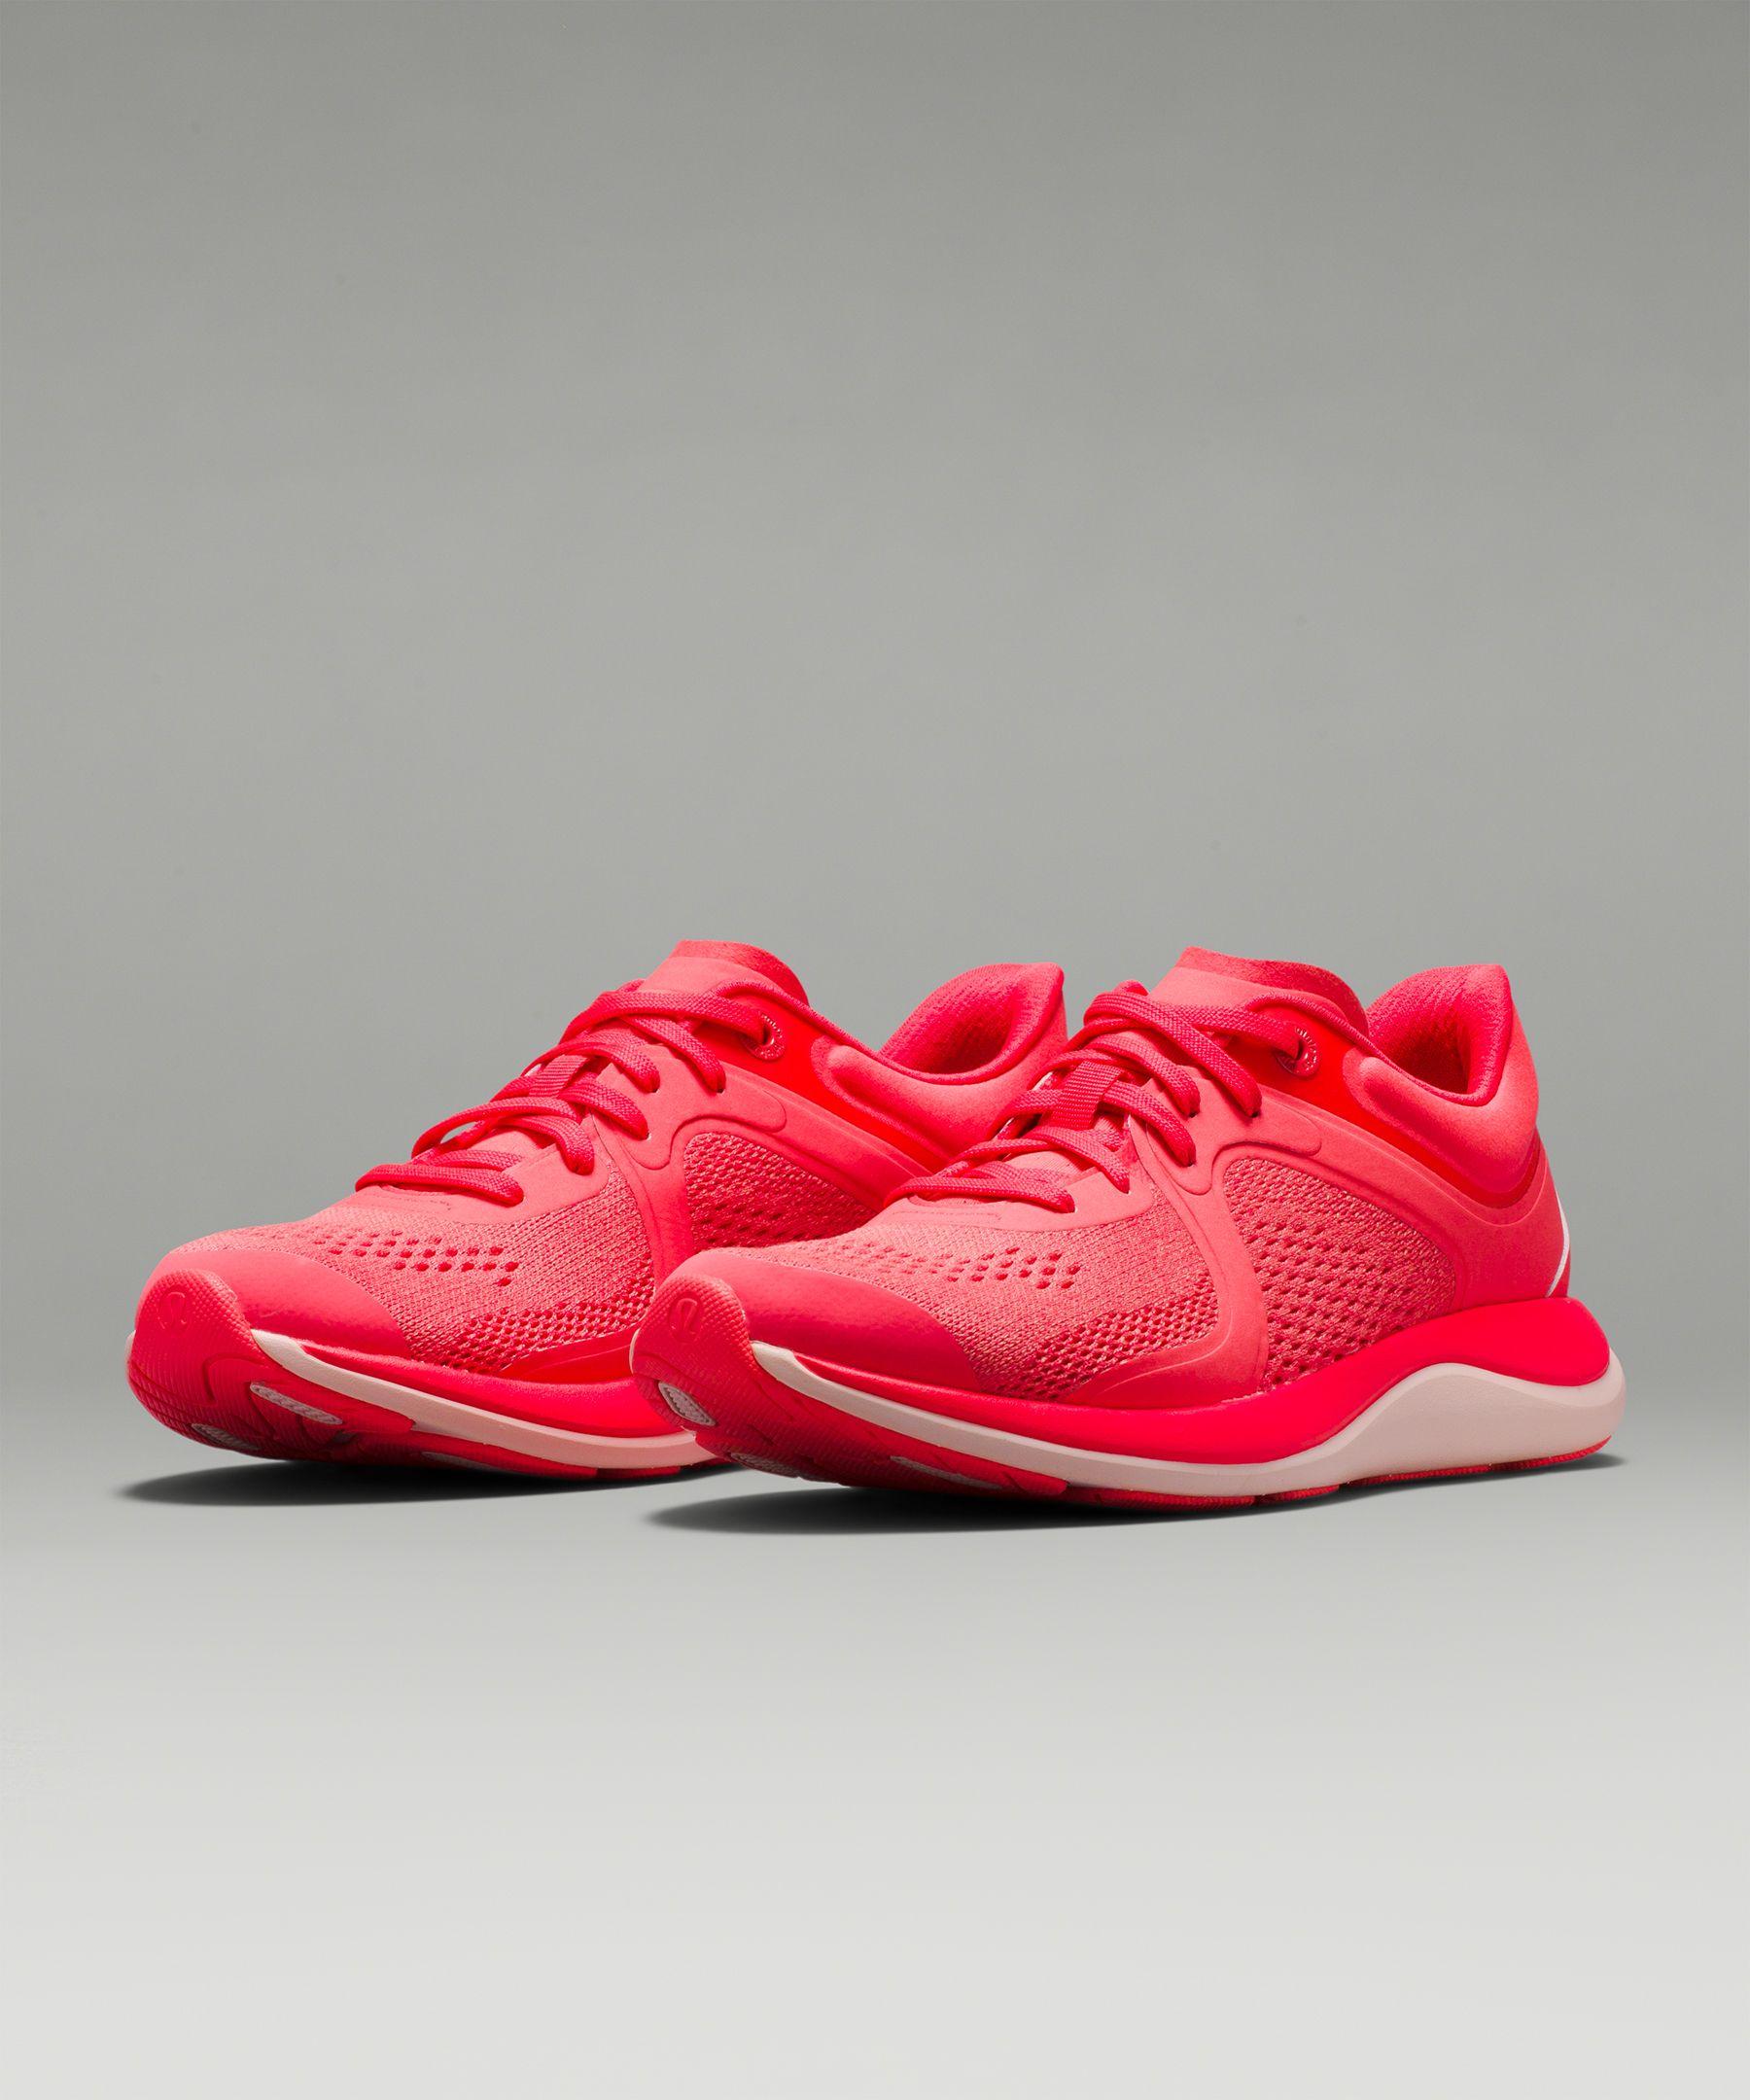 lululemon athletica Chargefeel Low Workout Shoe in Red